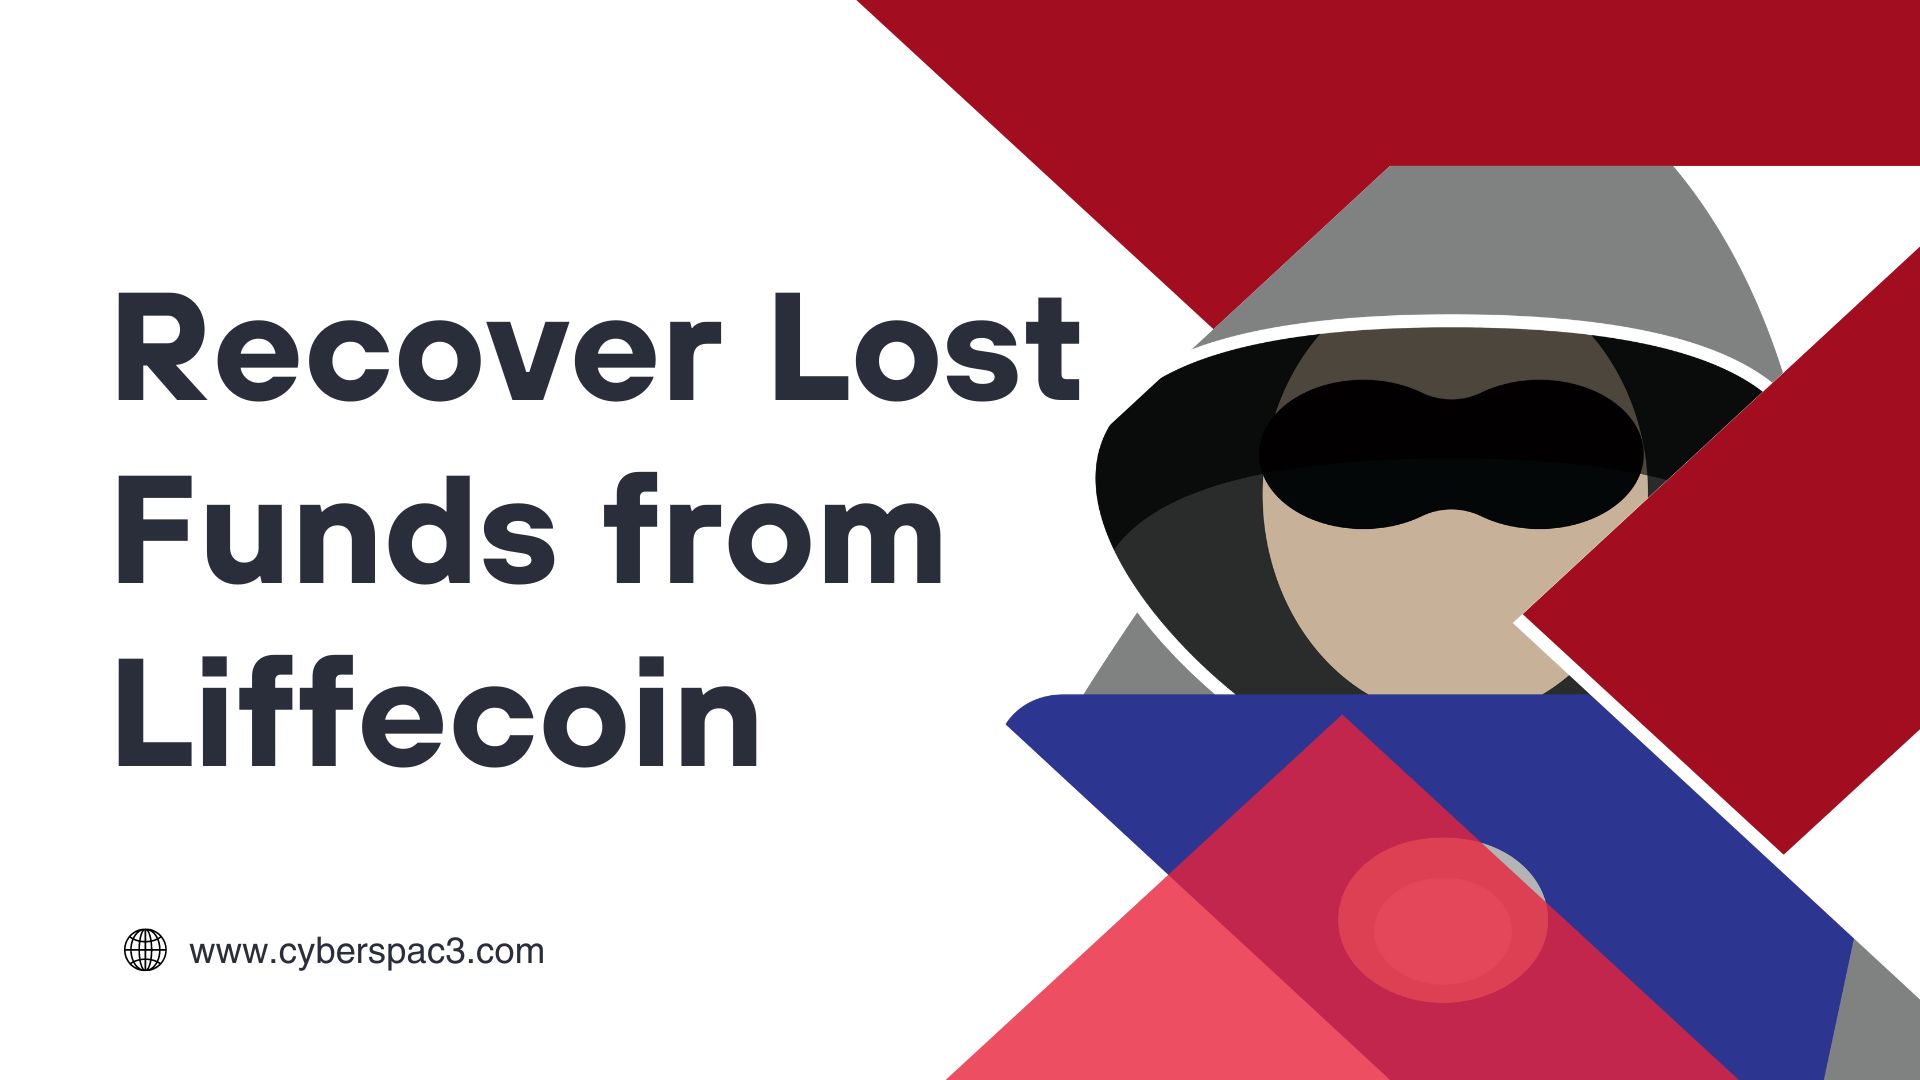 Recover Lost Funds from Liffecoin